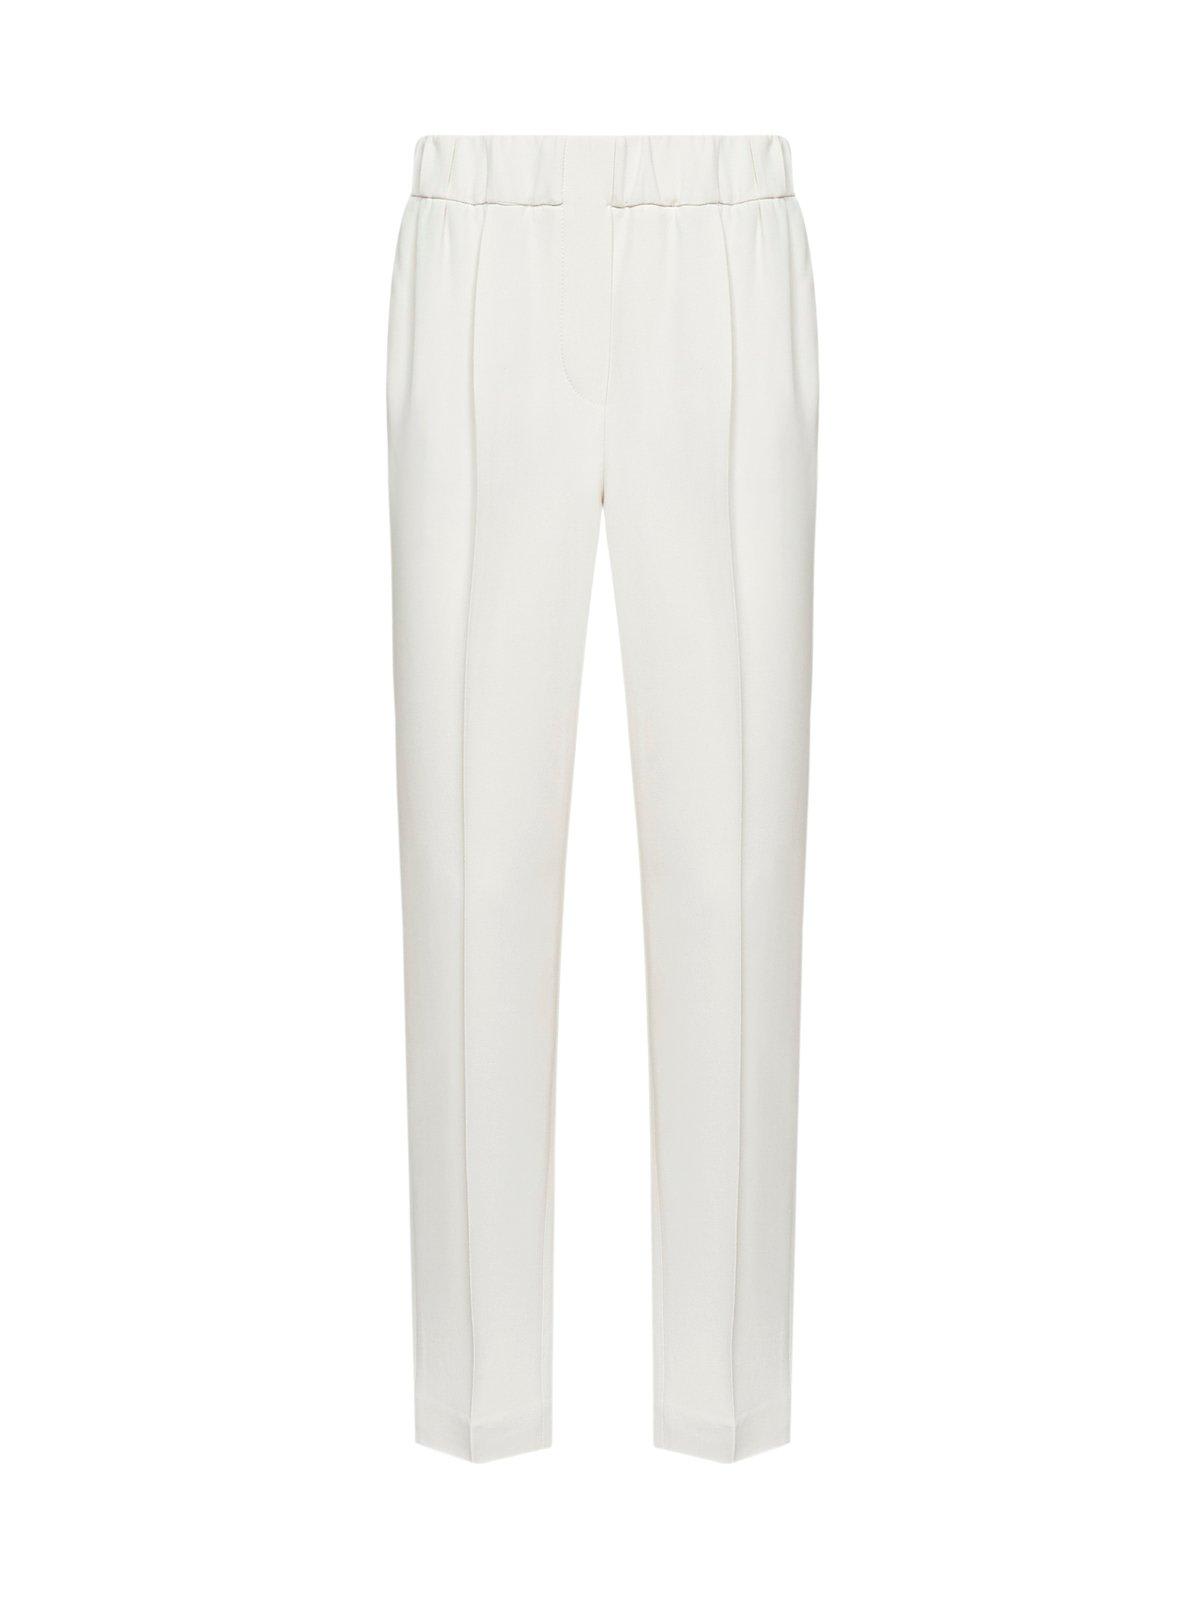 BRUNELLO CUCINELLI ELASTIC WAIST CROPPED TROUSERS